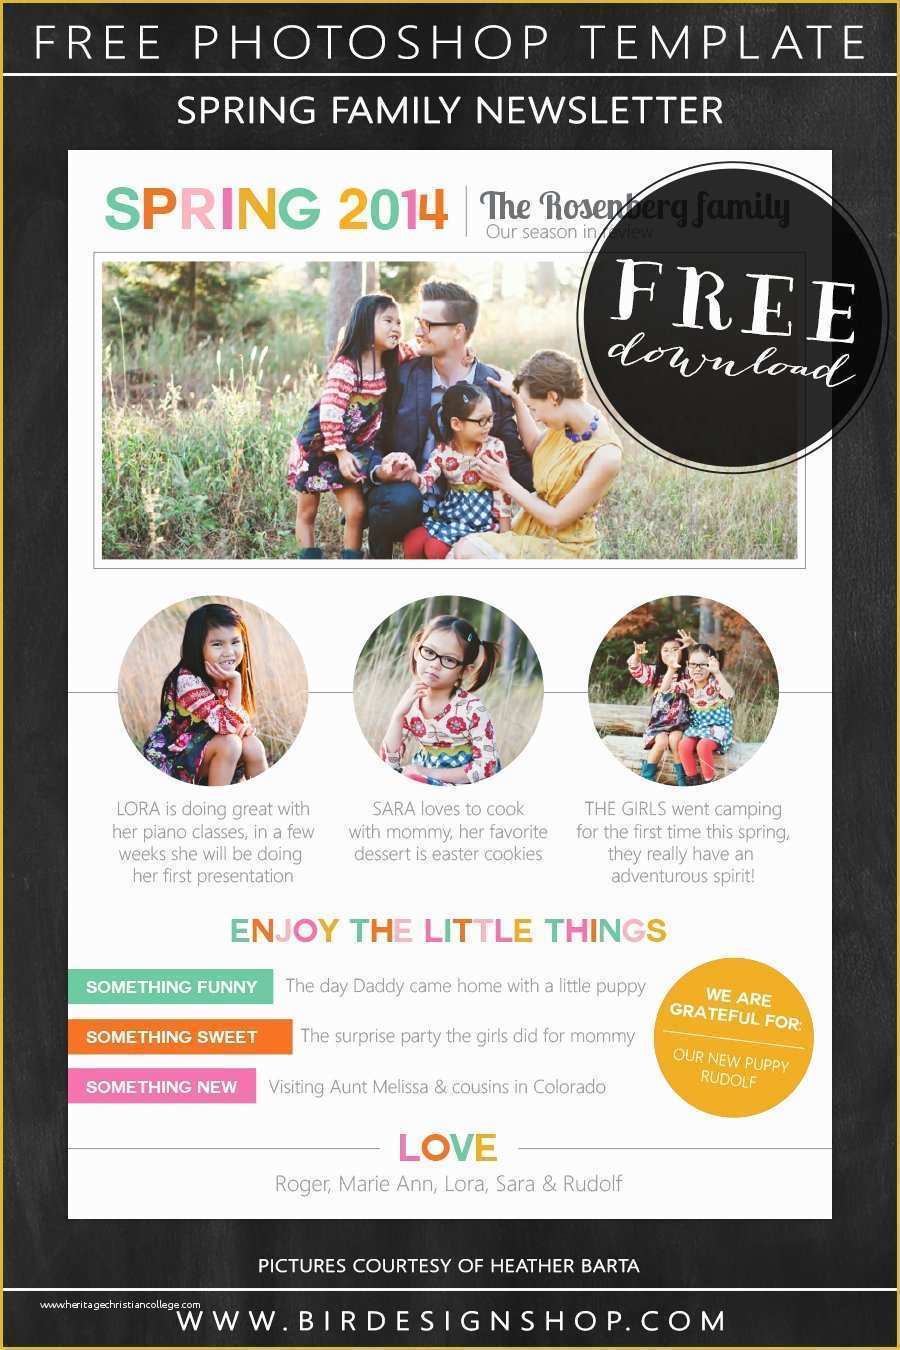 Free Psd Templates for Photographers Of Spring Family Newsletter Free Photoshop Template – Birdesign